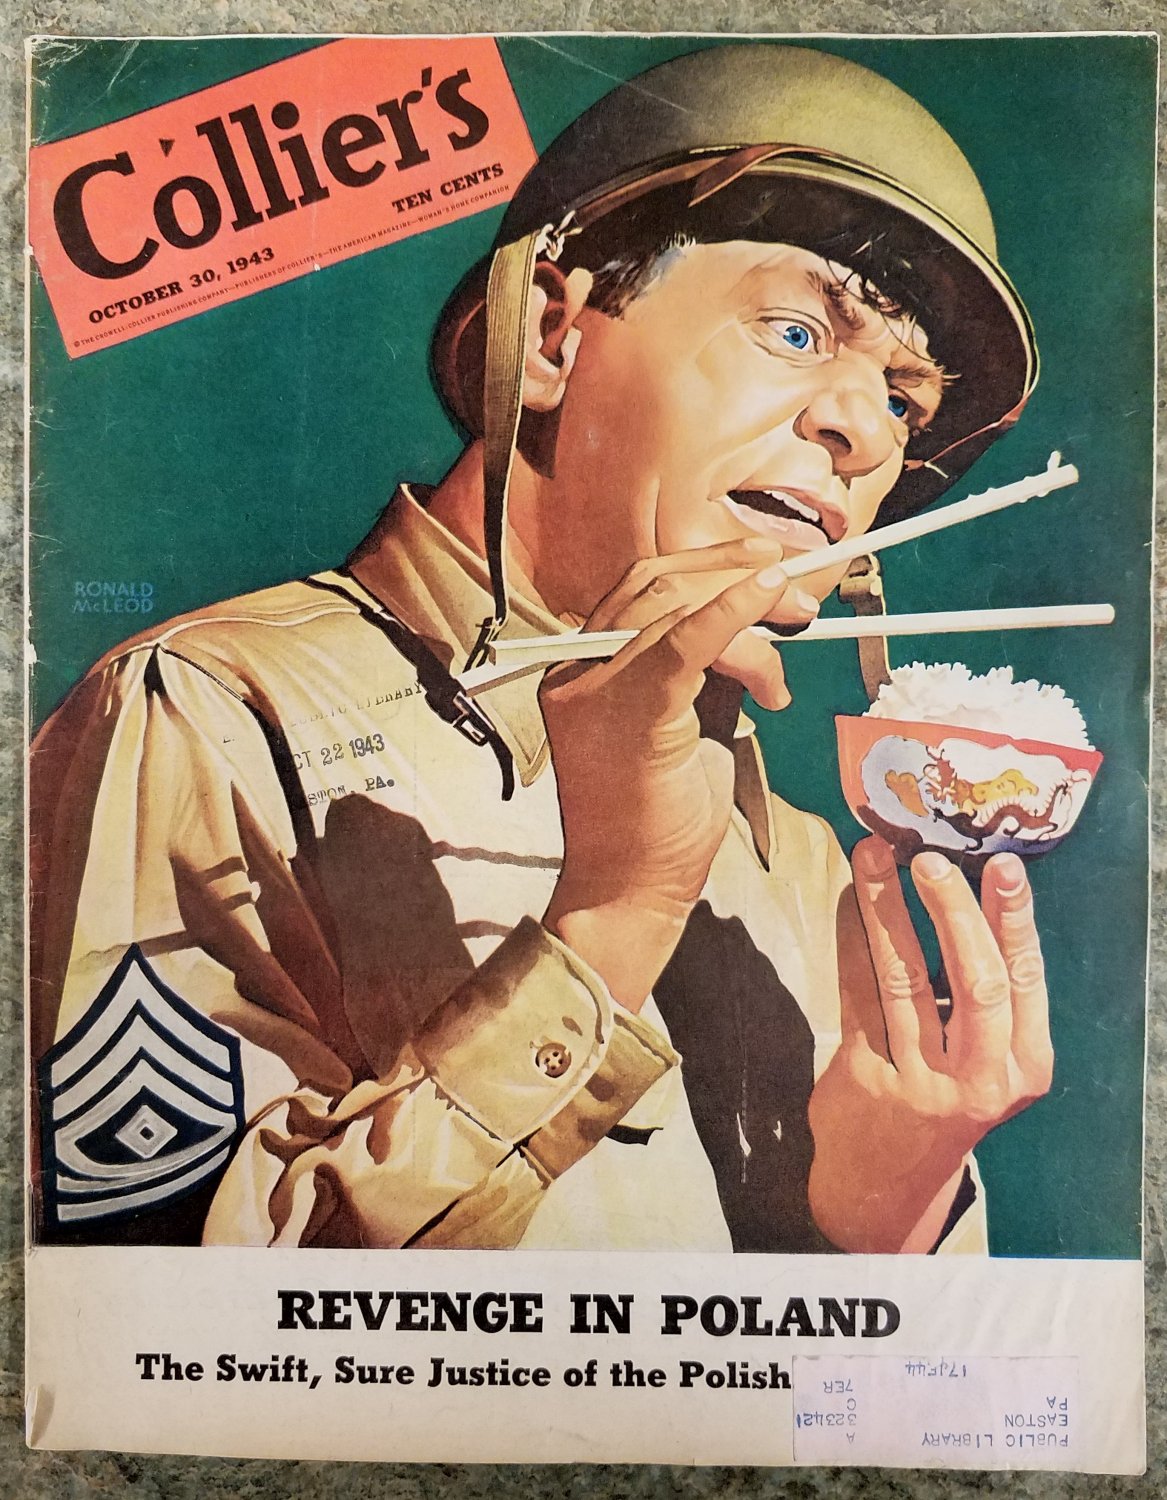 Colliers Magazine One Issue October 30 1943